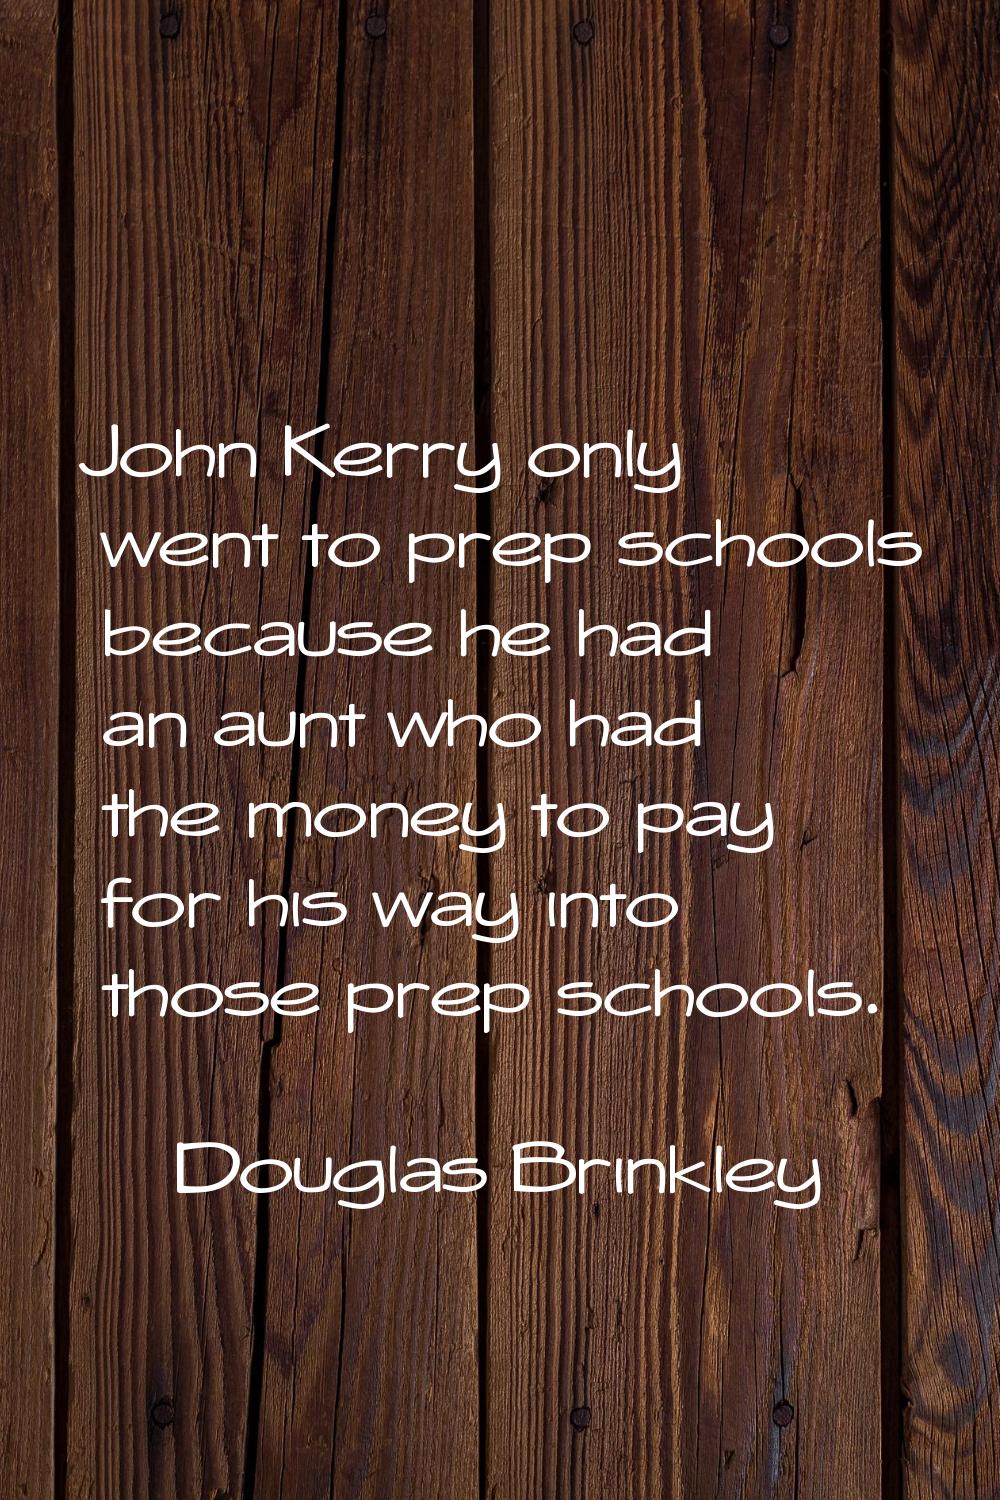 John Kerry only went to prep schools because he had an aunt who had the money to pay for his way in